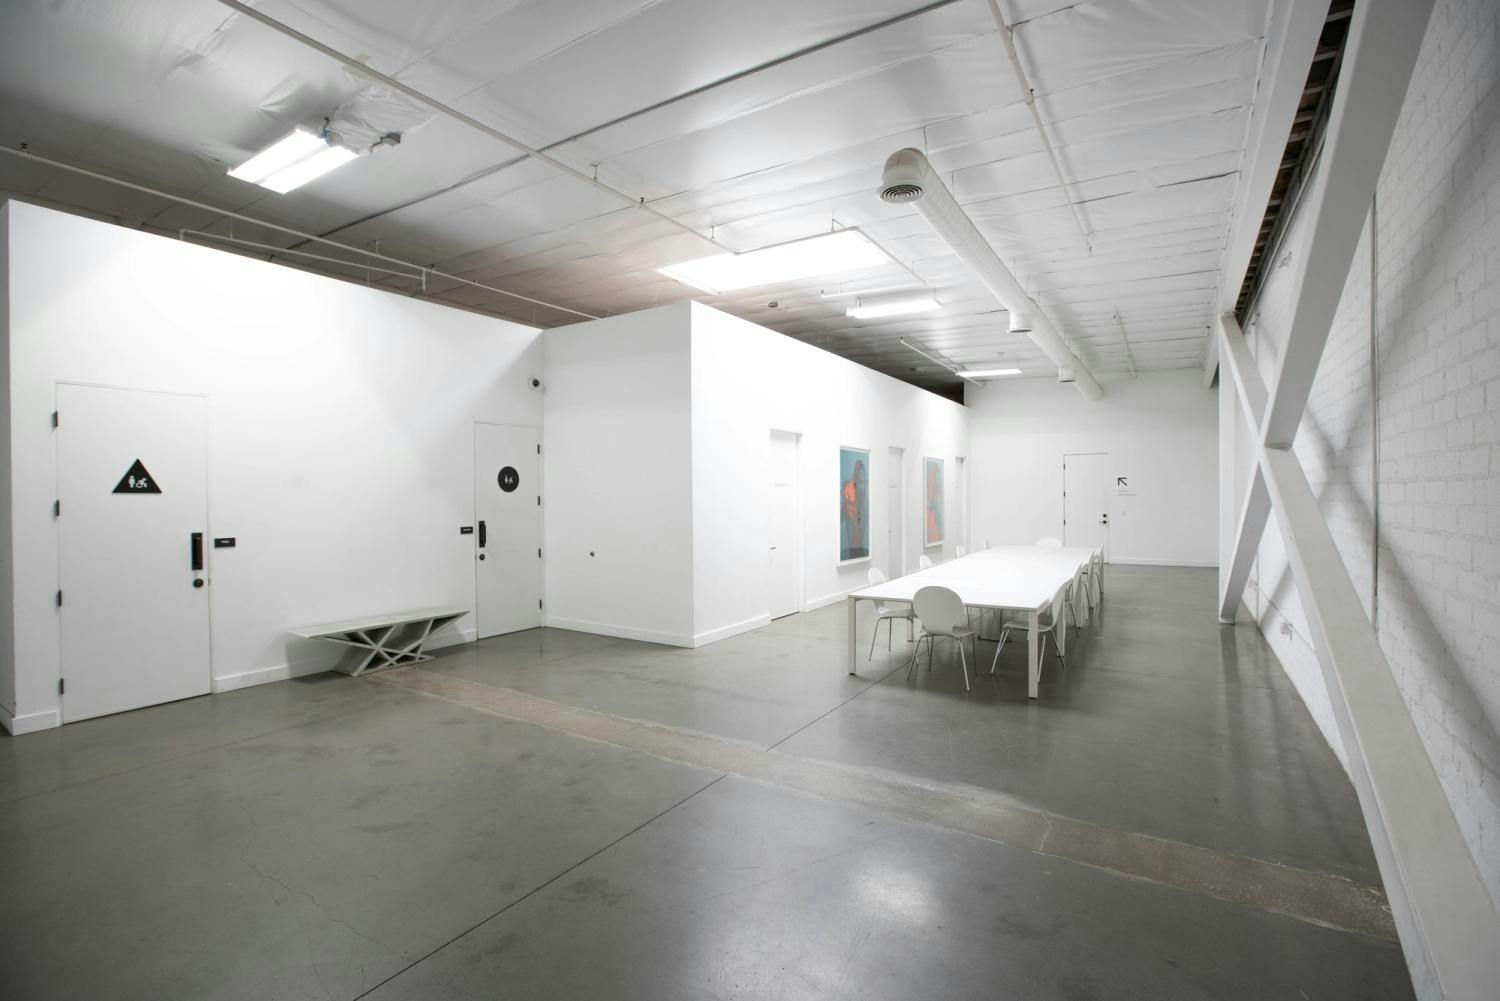 A bright and spacious gallery-like room with white walls, a long meeting table, and modern art, featuring an industrial ceiling with exposed pipes and ductwork.